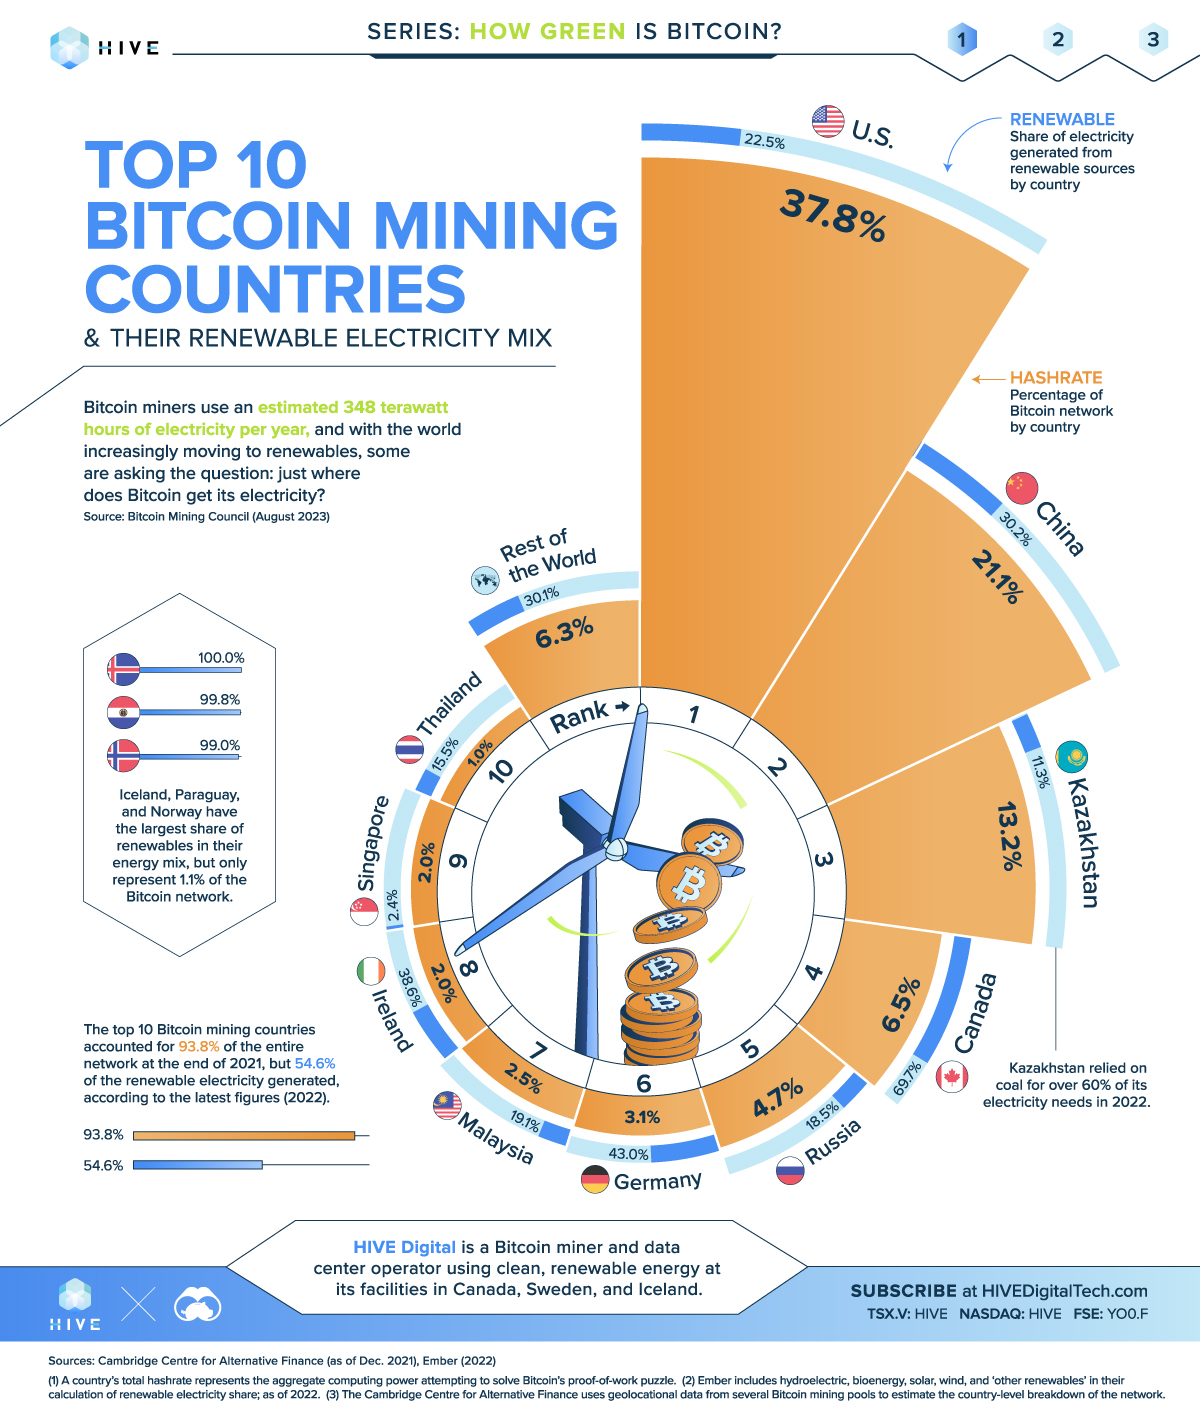 Infographic showing the top 10 countries for Bitcoin mining, led by the U.S. Kazakhstan, and China, and their renewable electricity mix. Only China, Canada, Germany, and Ireland had renewable mixes above the global average of 30%.